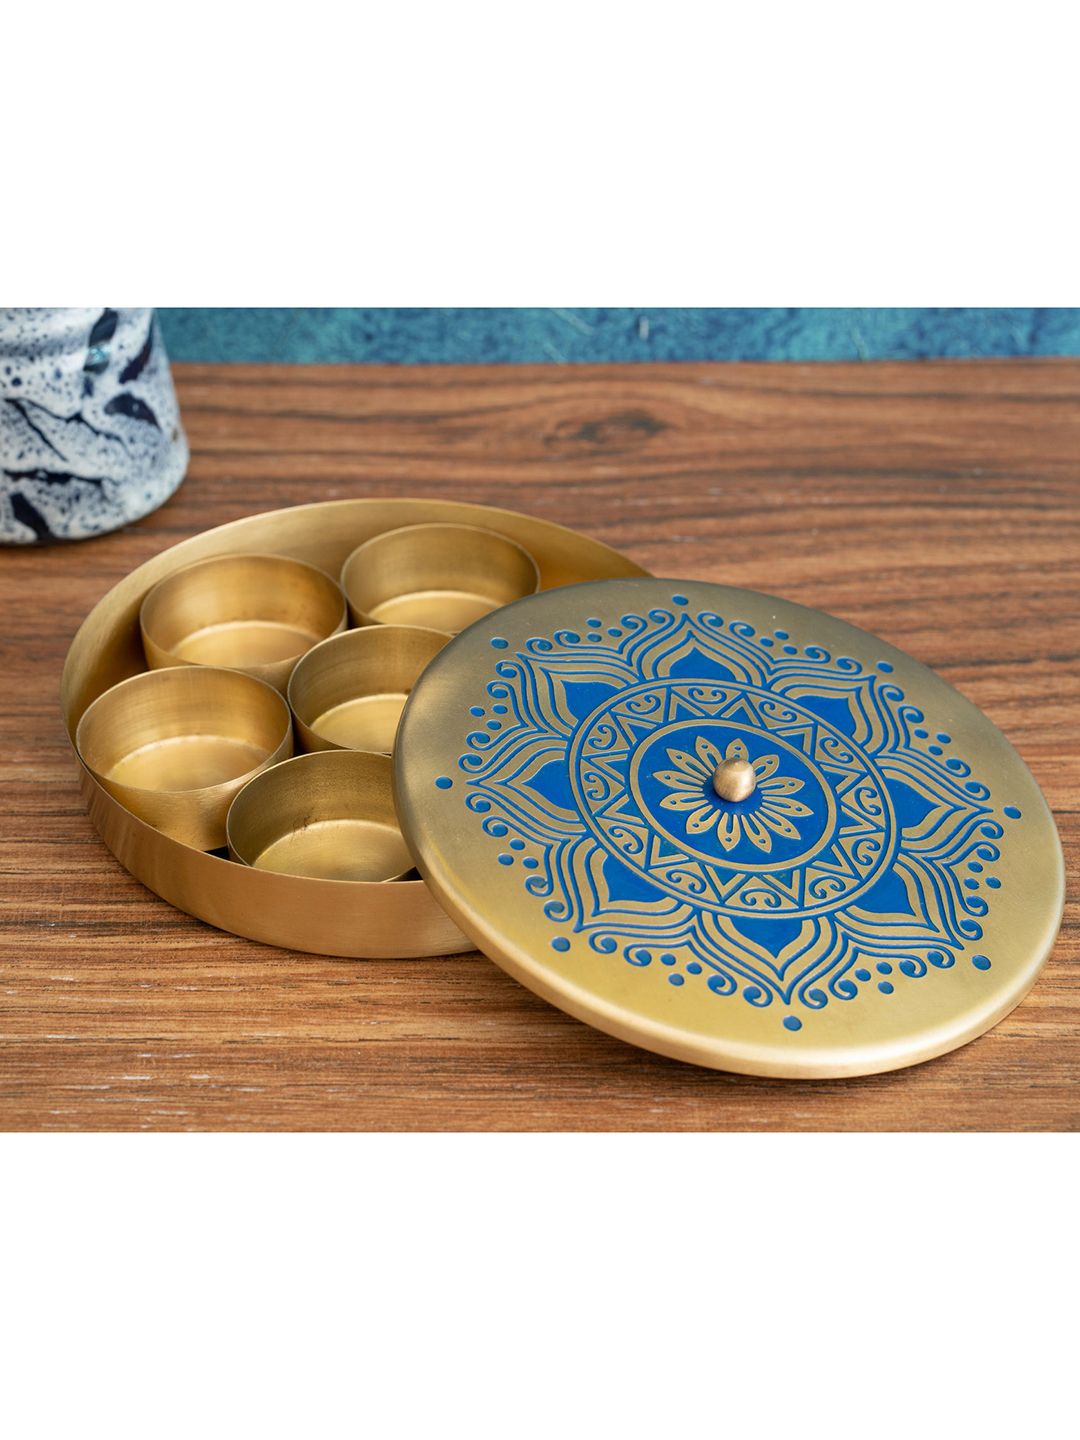 nakshikathaa Gold-Toned & Blue Printed Brass Spice Box With Containers Price in India